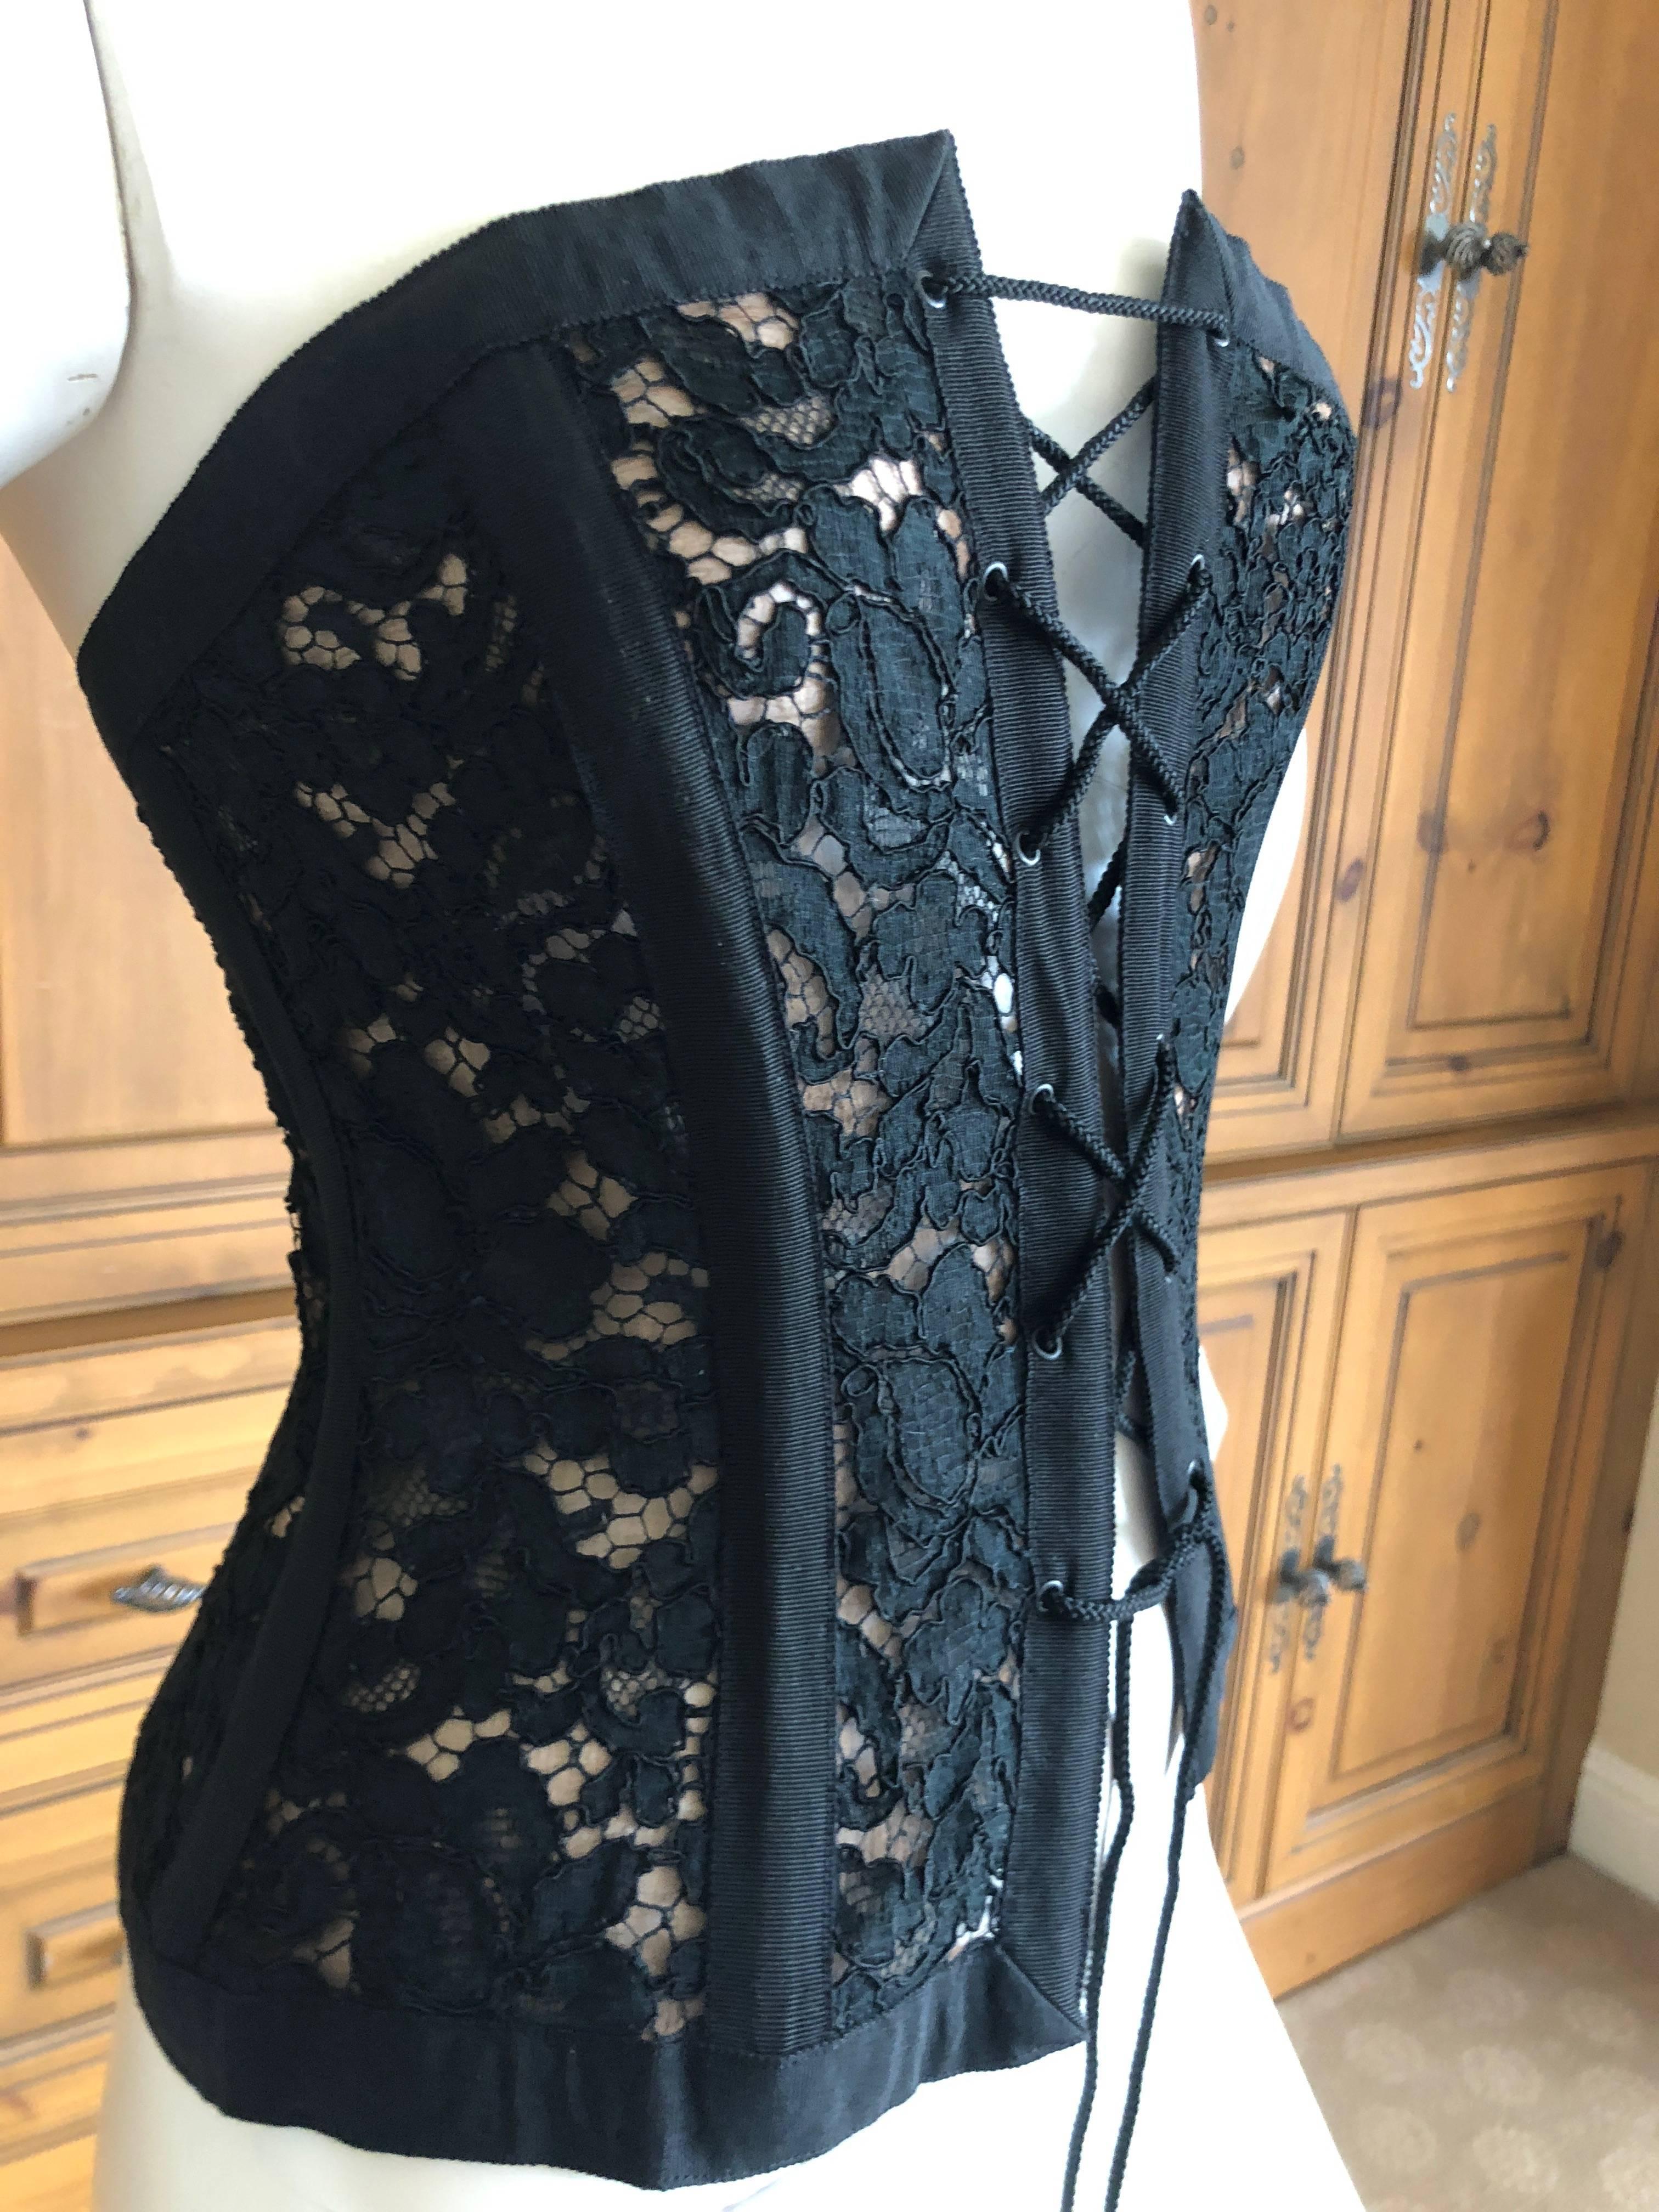 Yves Saint Laurent Rive Gauche 1970's Corset Lace Peasant Top.
The corset lace top has been a signature YSL Style since the beginning of the house.
This is a very early example of the corset lace up top,.
Size small
Bust 34